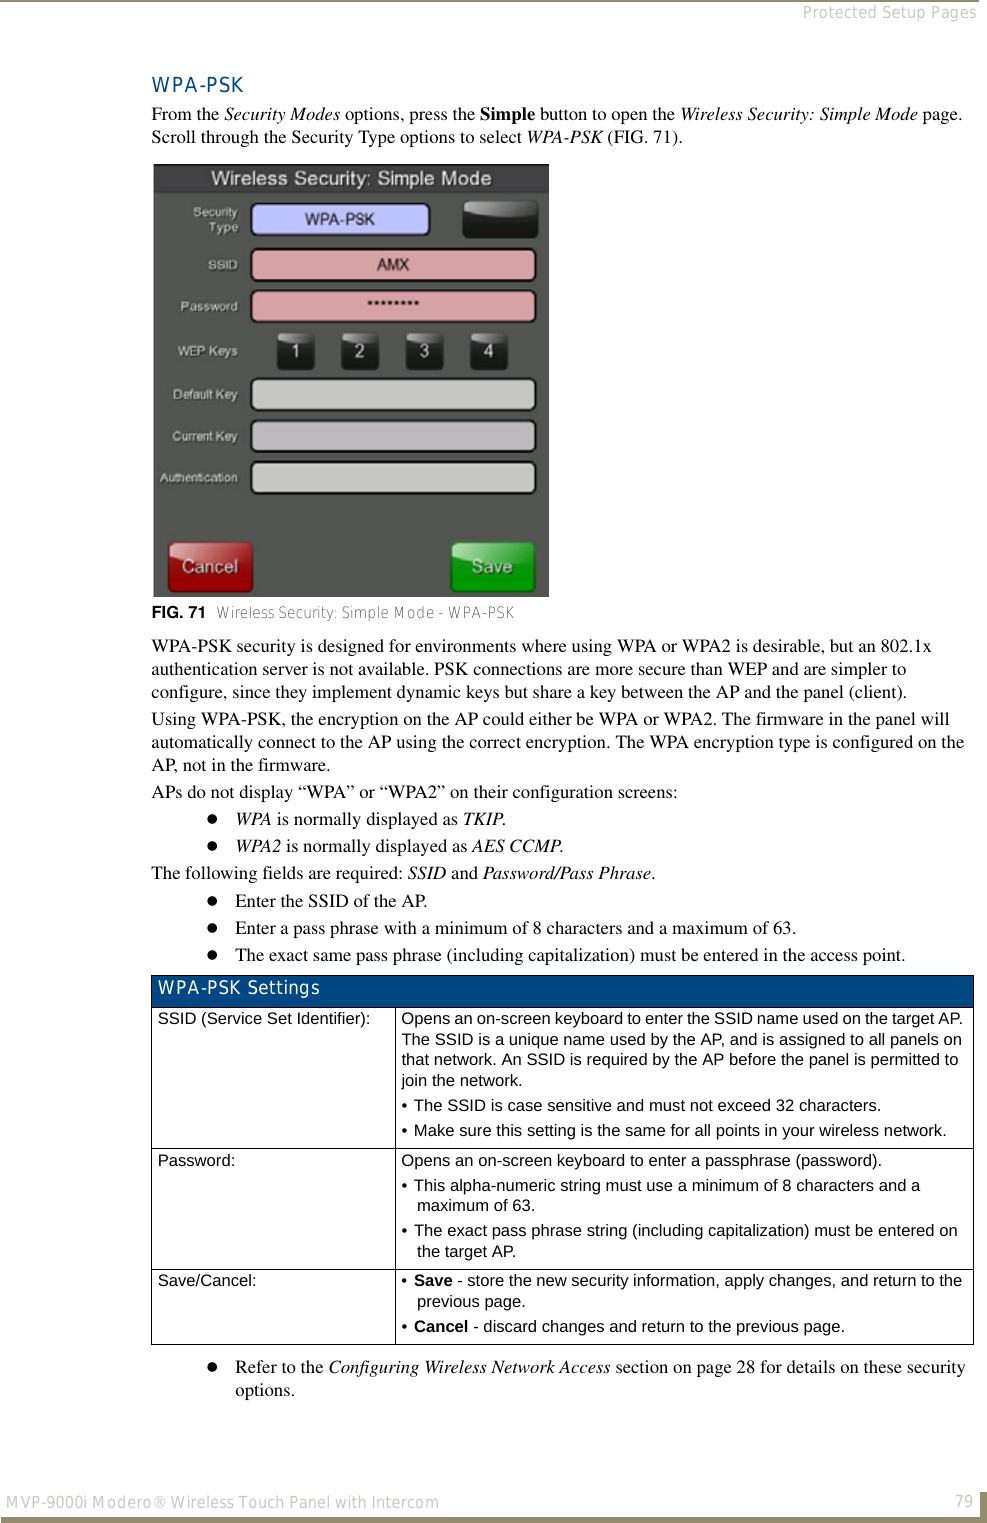 Protected Setup Pages79MVP-9000i Modero® Wireless Touch Panel with IntercomWPA-PSKFrom the Security Modes options, press the Simple button to open the Wireless Security: Simple Mode page. Scroll through the Security Type options to select WPA-PSK (FIG. 71).  WPA-PSK security is designed for environments where using WPA or WPA2 is desirable, but an 802.1x authentication server is not available. PSK connections are more secure than WEP and are simpler to configure, since they implement dynamic keys but share a key between the AP and the panel (client).Using WPA-PSK, the encryption on the AP could either be WPA or WPA2. The firmware in the panel will automatically connect to the AP using the correct encryption. The WPA encryption type is configured on the AP, not in the firmware.APs do not display “WPA” or “WPA2” on their configuration screens:WPA is normally displayed as TKIP. WPA2 is normally displayed as AES CCMP.The following fields are required: SSID and Password/Pass Phrase.Enter the SSID of the AP.Enter a pass phrase with a minimum of 8 characters and a maximum of 63.The exact same pass phrase (including capitalization) must be entered in the access point. Refer to the Configuring Wireless Network Access section on page 28 for details on these security options. FIG. 71  Wireless Security: Simple Mode - WPA-PSKWPA-PSK SettingsSSID (Service Set Identifier): Opens an on-screen keyboard to enter the SSID name used on the target AP. The SSID is a unique name used by the AP, and is assigned to all panels on that network. An SSID is required by the AP before the panel is permitted to join the network. • The SSID is case sensitive and must not exceed 32 characters. • Make sure this setting is the same for all points in your wireless network.Password: Opens an on-screen keyboard to enter a passphrase (password).• This alpha-numeric string must use a minimum of 8 characters and a maximum of 63. • The exact pass phrase string (including capitalization) must be entered on the target AP.Save/Cancel: • Save - store the new security information, apply changes, and return to the previous page.•Cancel - discard changes and return to the previous page.